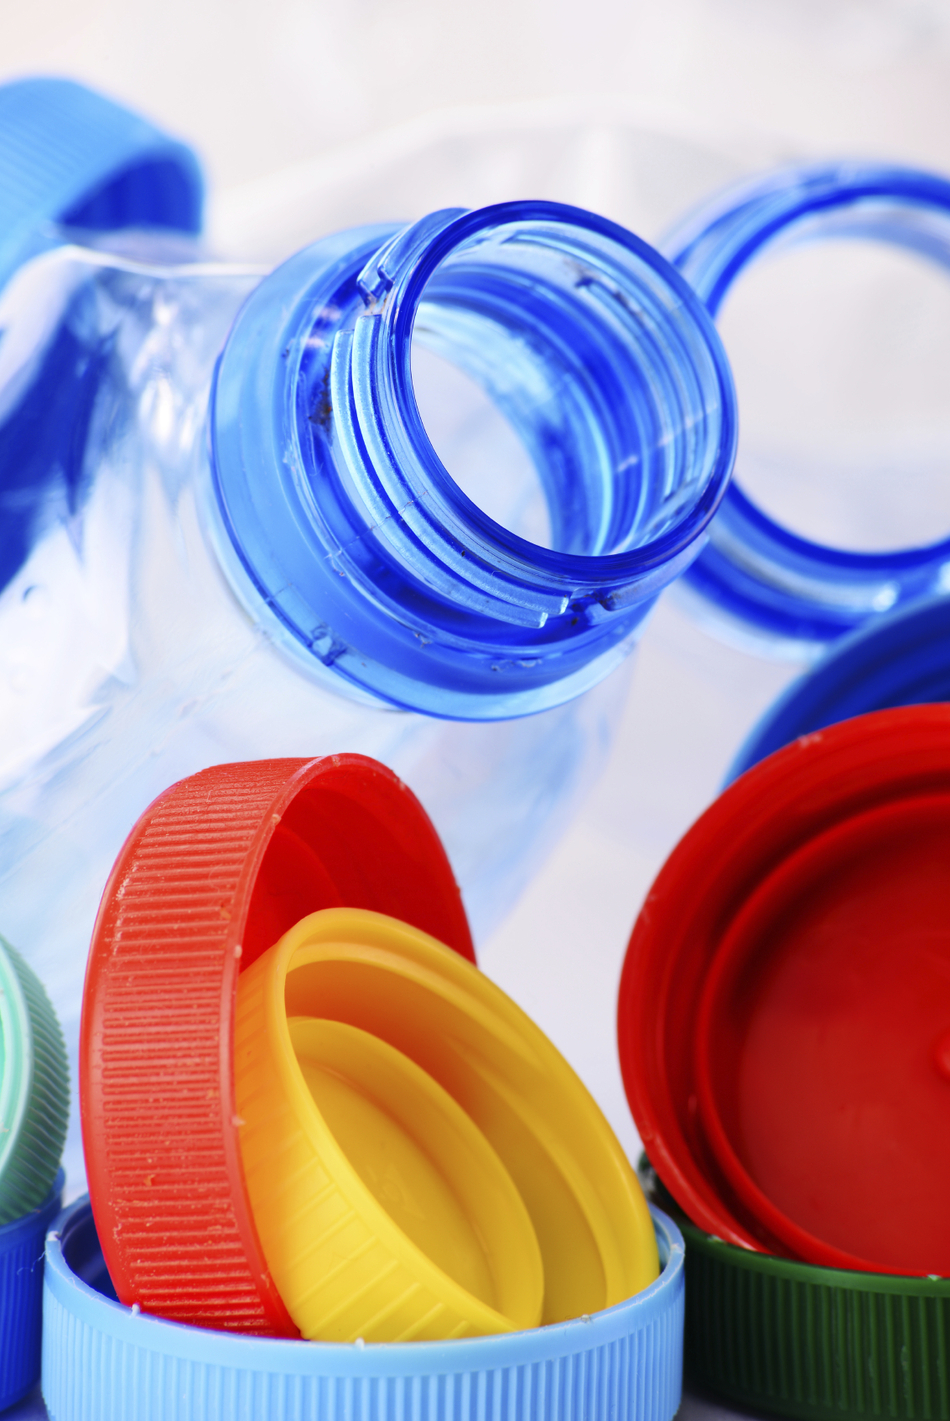 What We Don't Know About the Effects of BPA on Pregnancy